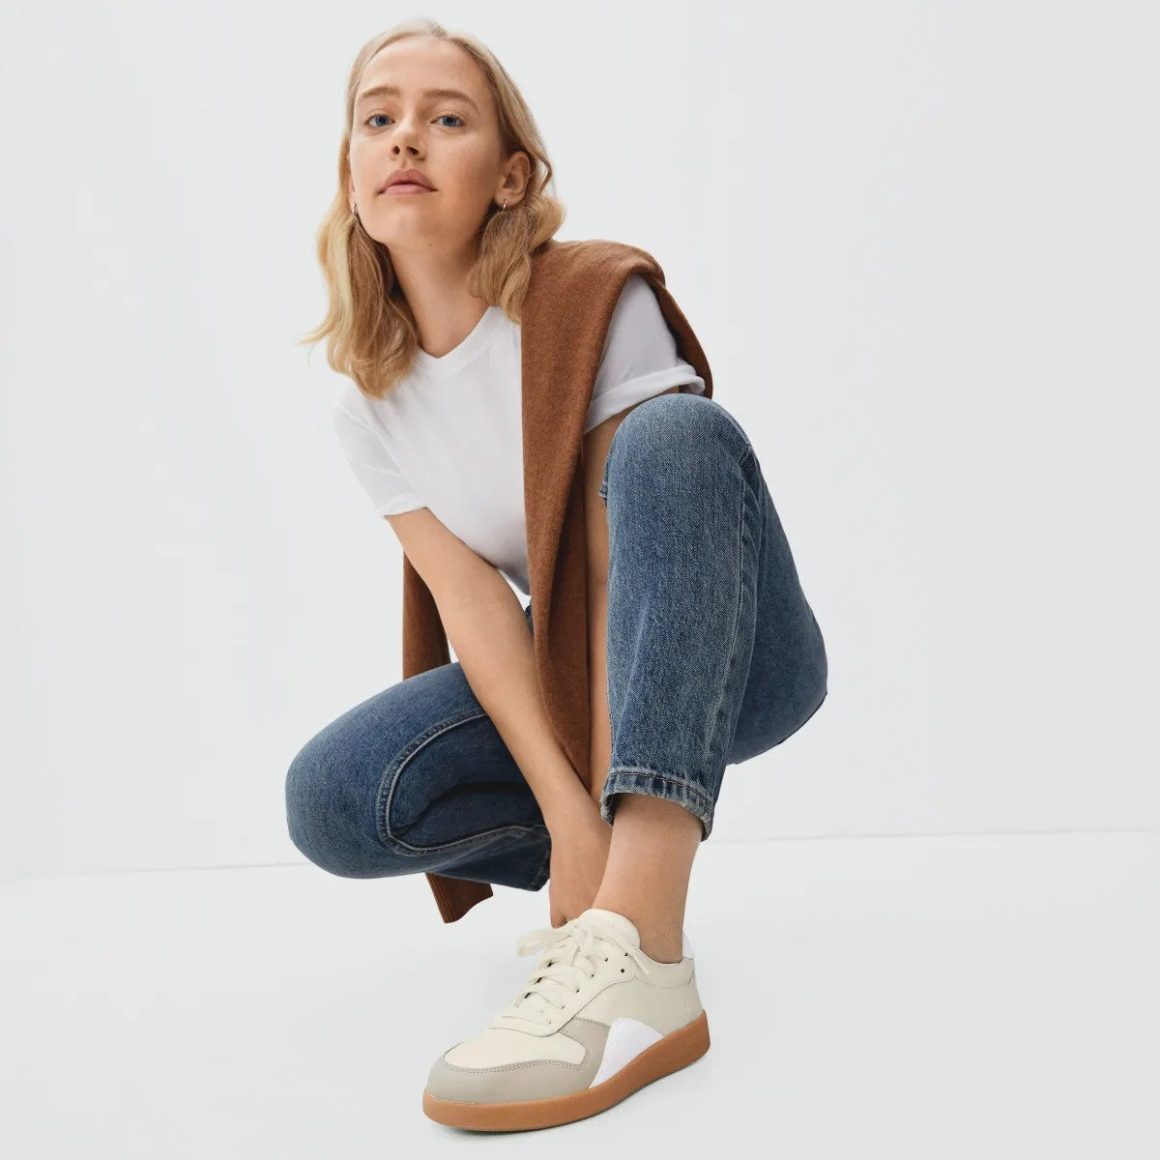 Recycled Leather Footwear Collection Released by Everlane